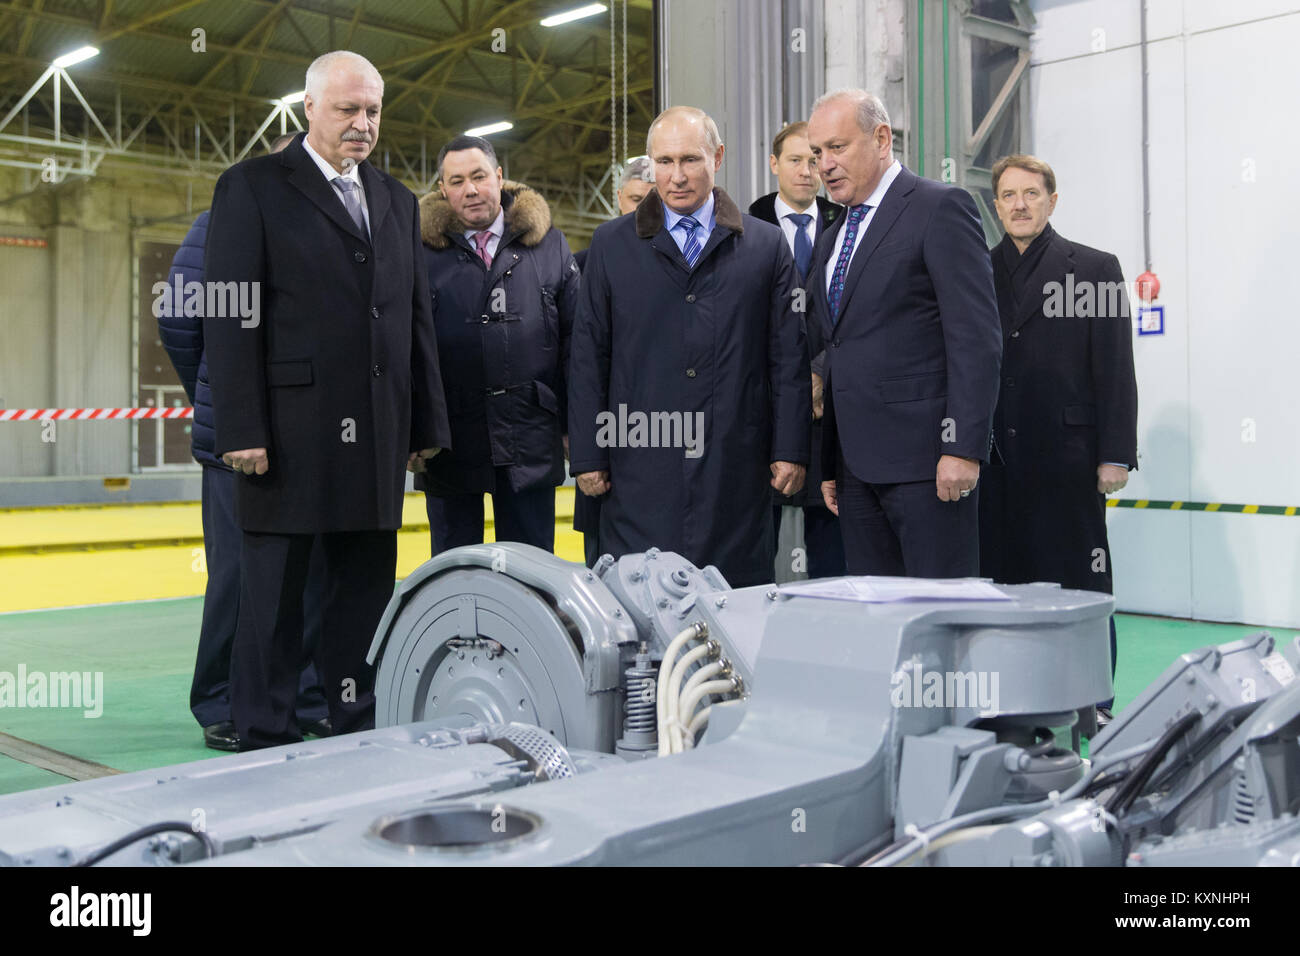 Tver, Russia. 10th Jan, 2018. Russian President Vladimir Putin (C) visits the Tver Carriage Works in Tver, Russia, on Jan. 10, 2018. Inflation in Russia hit a record low of 2.5 percent last year, the country's official statistics service Rosstat said Wednesday. The Russian economy is improving and the positive momentum continues, President Vladimir Putin said Wednesday when visiting the railway carriage factory. Credit: Bai Xueqi/Xinhua/Alamy Live News Stock Photo